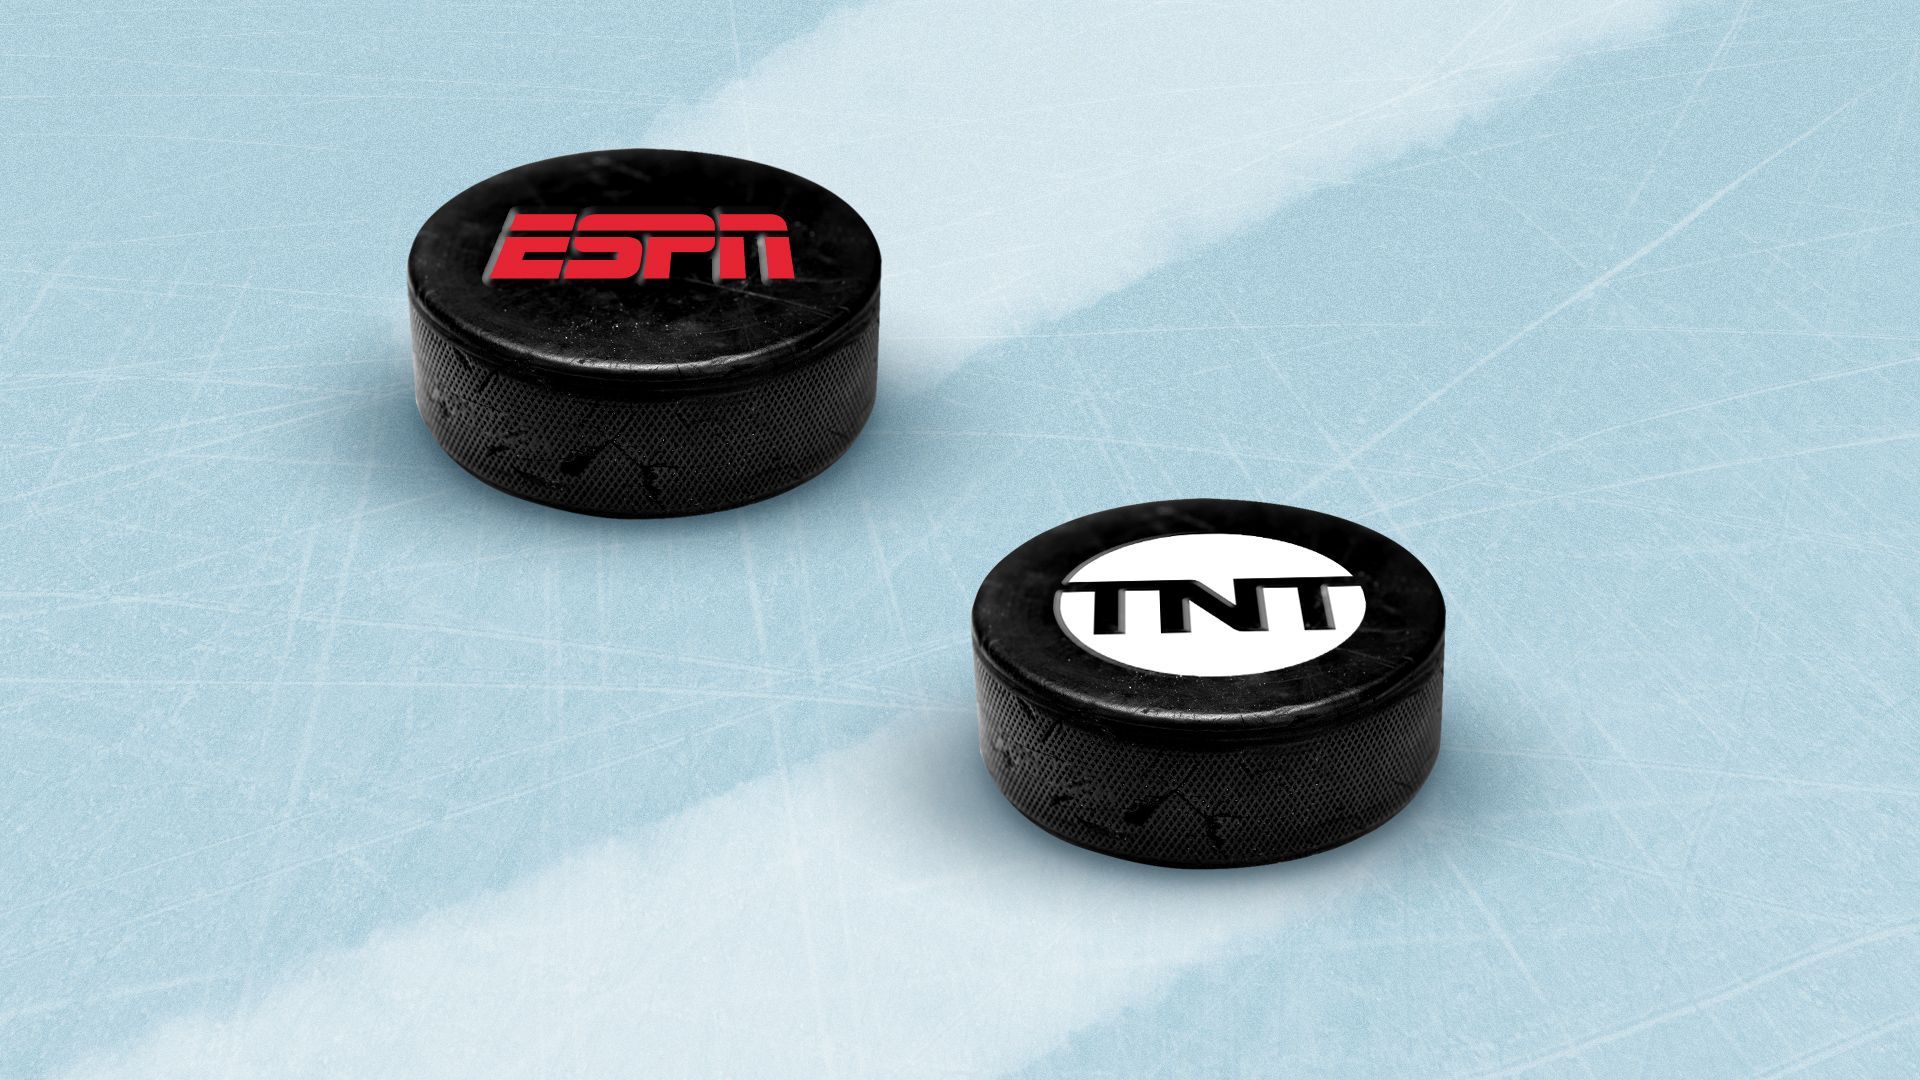 Illustration of two hockey pucks with the ESPN and TNT logos on them, sliding across the ice.